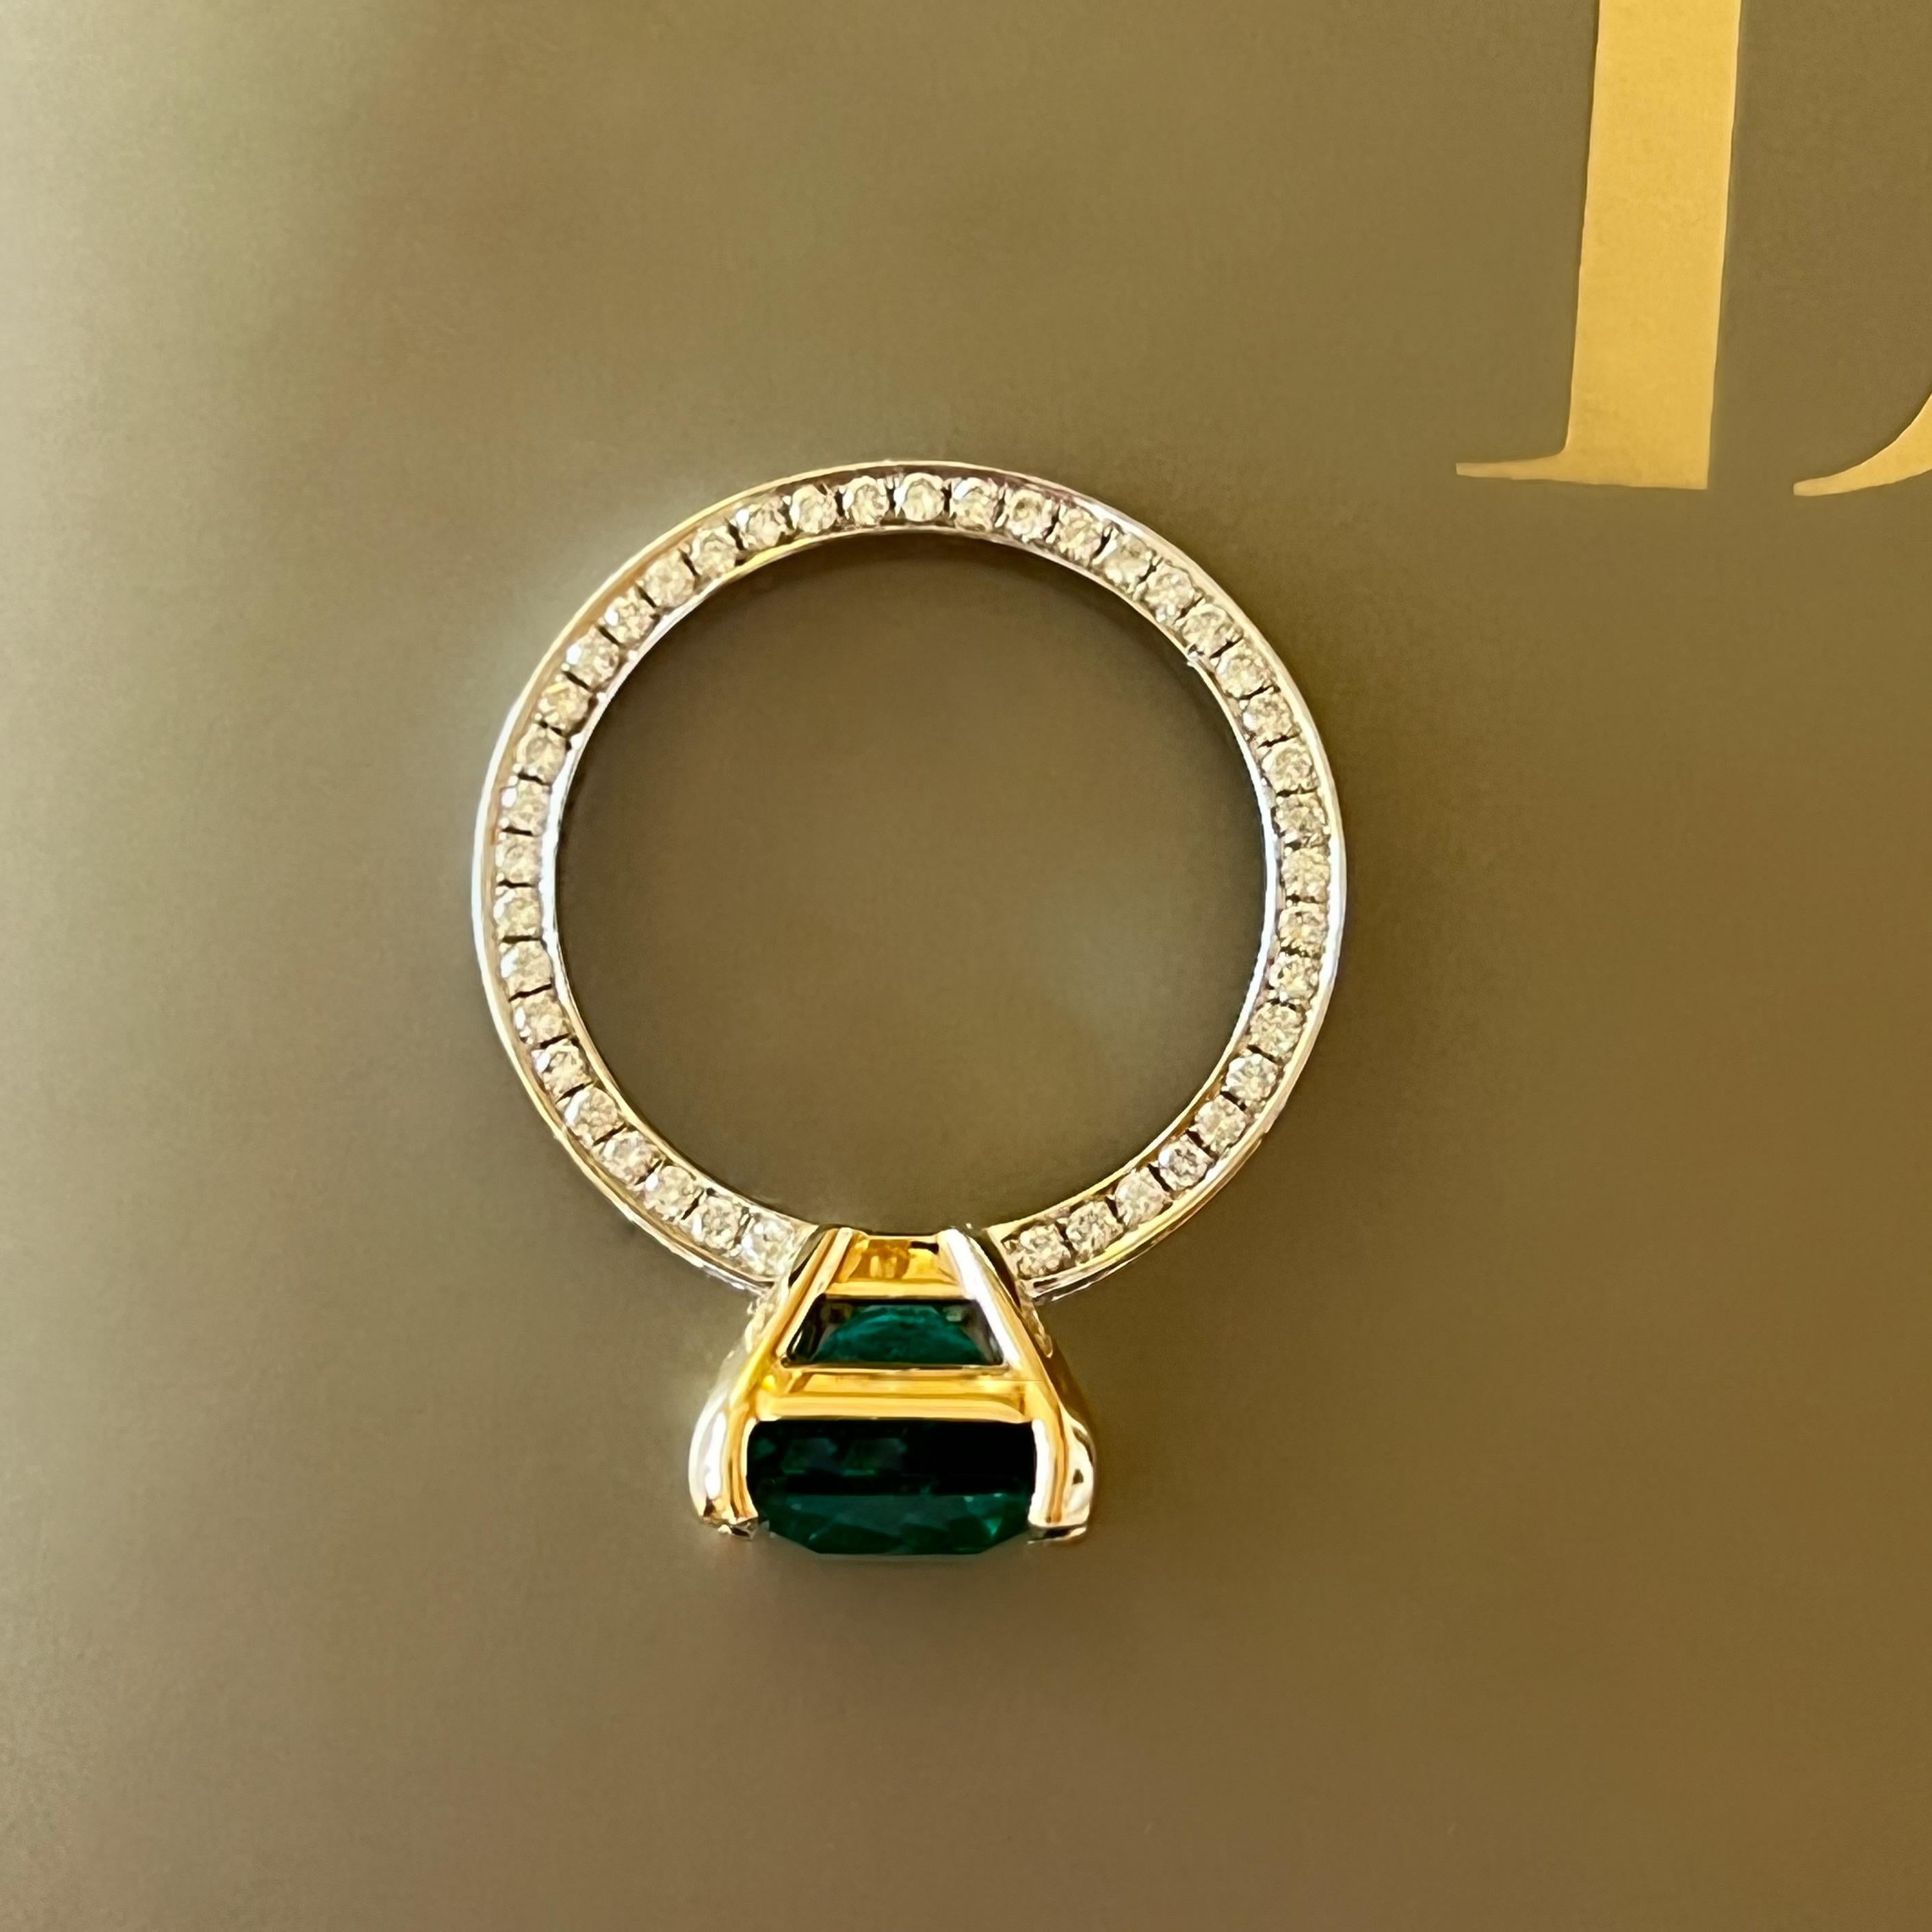 For more than 5000 years emeralds are one of the most famous gemstones in the world. 
They are rare, precious and very beautiful. The main parameter that affects the value and the price of an emerald is color. In this ring we used very nice